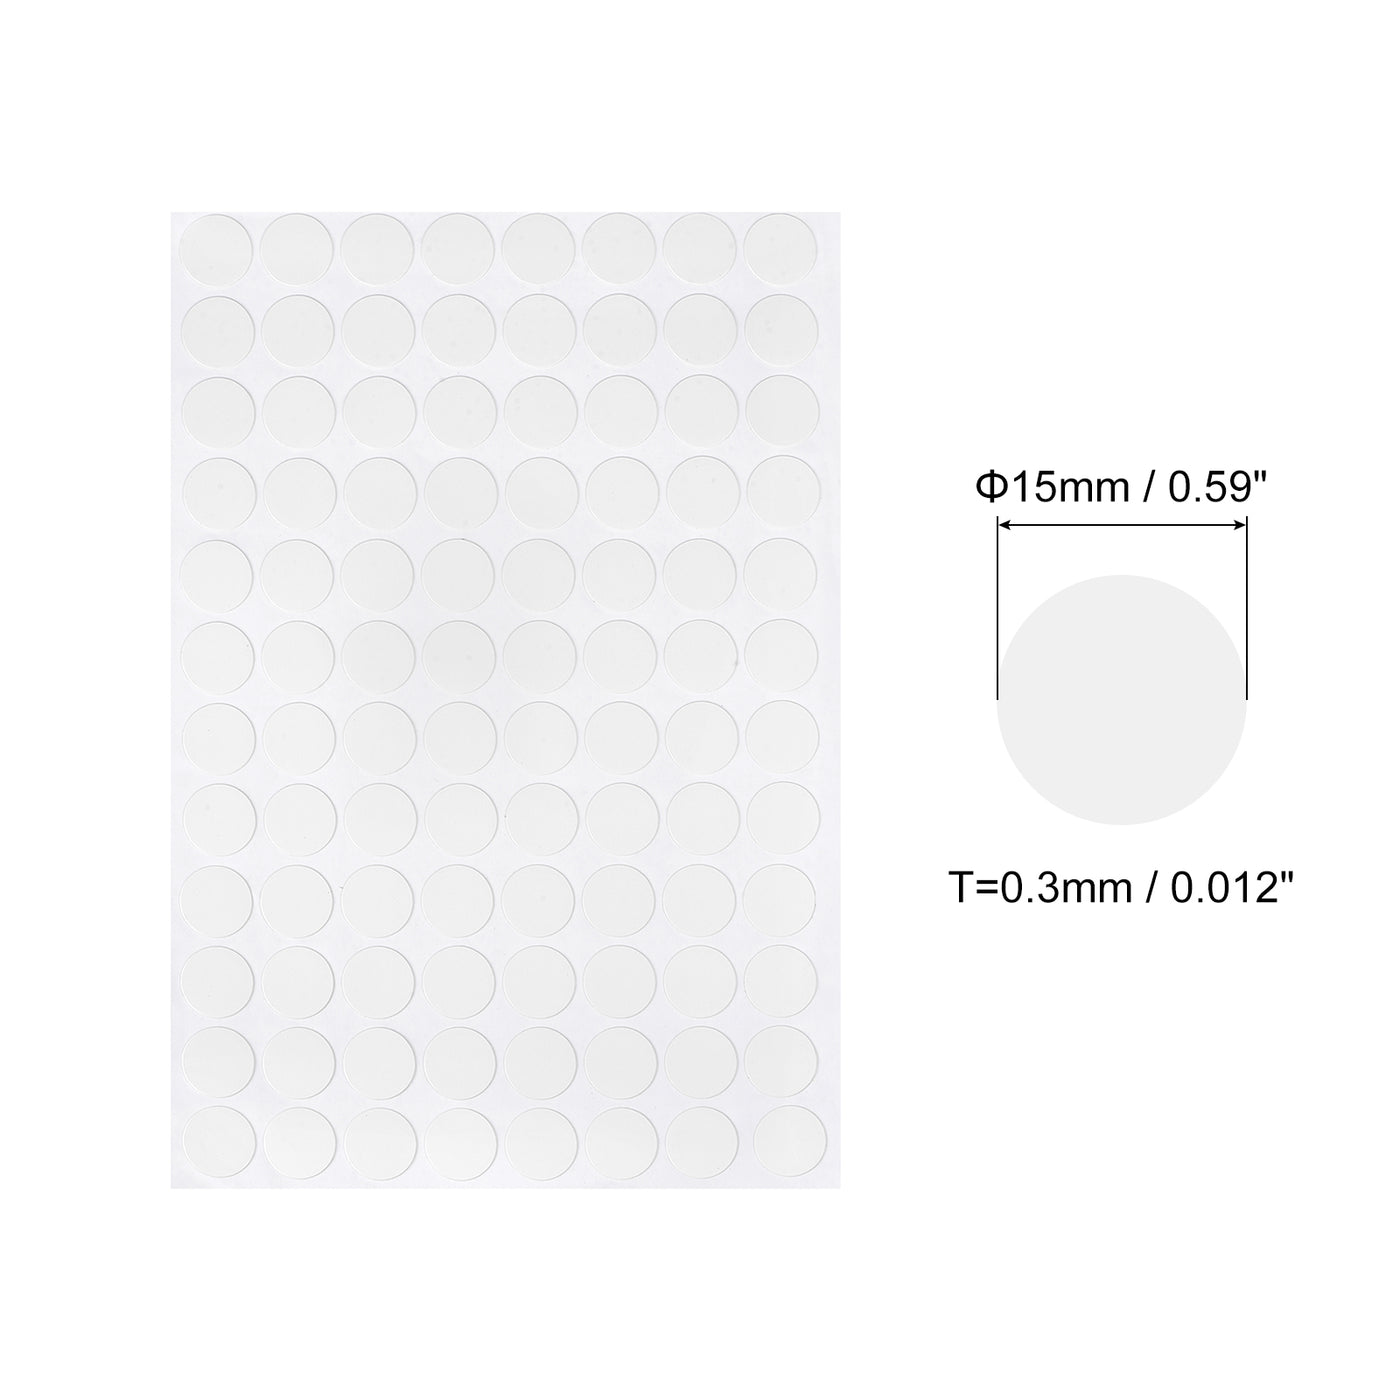 uxcell Uxcell Screw Hole Cover Stickers, 15mm Dia PVC Self Adhesive Covers Caps for Wood Furniture Cabinet Shelf Wardrobe, White 2 Sheet/192pcs